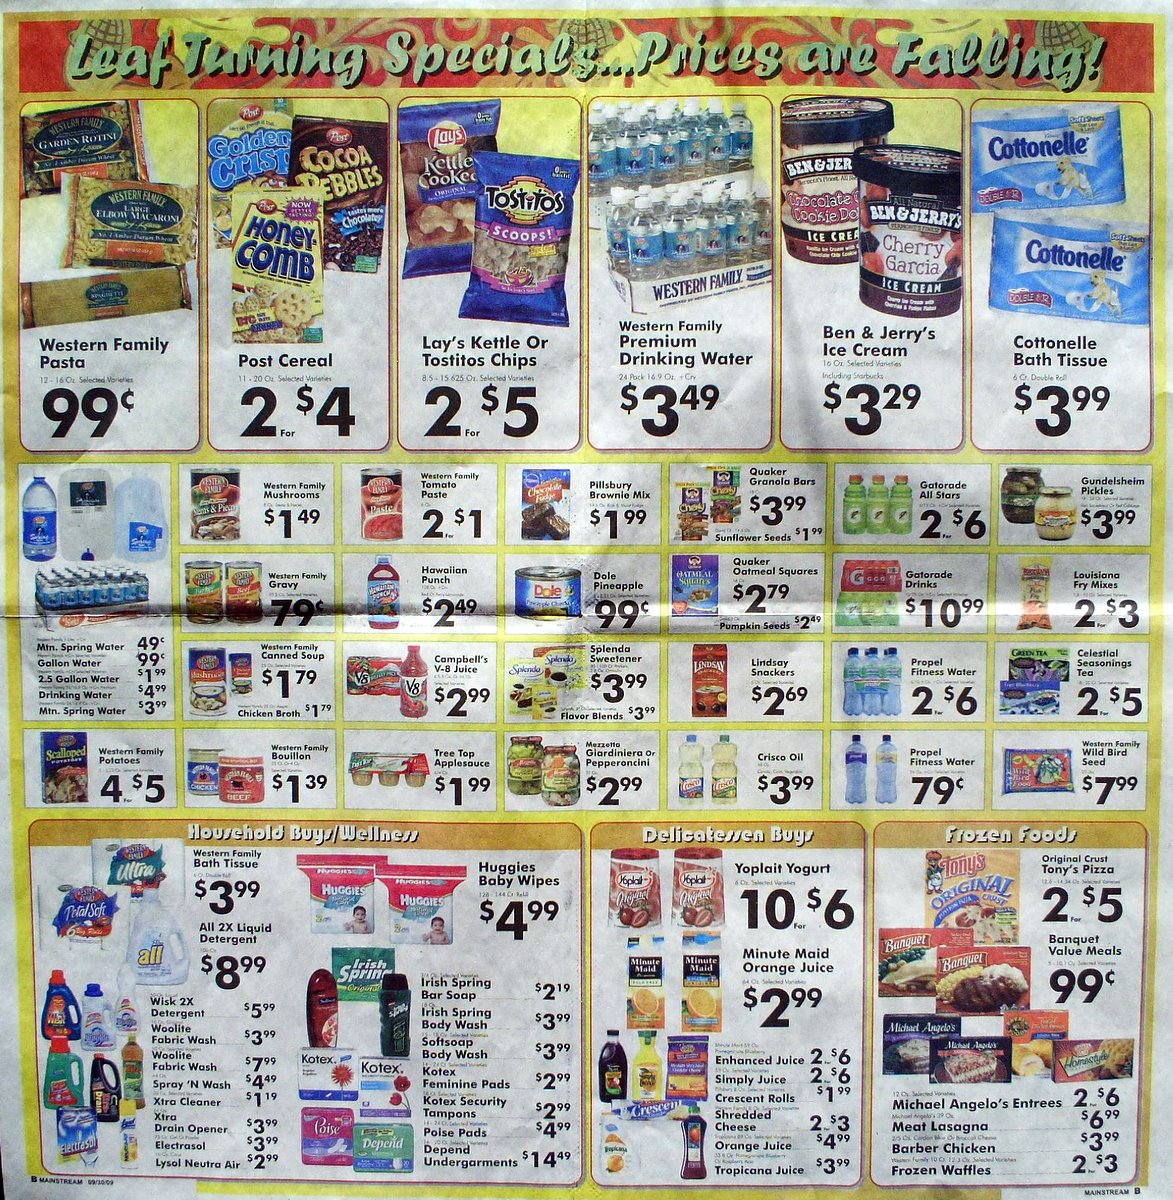 Big Trees Market Weekly Ad for September 30th - October 6th, 2009